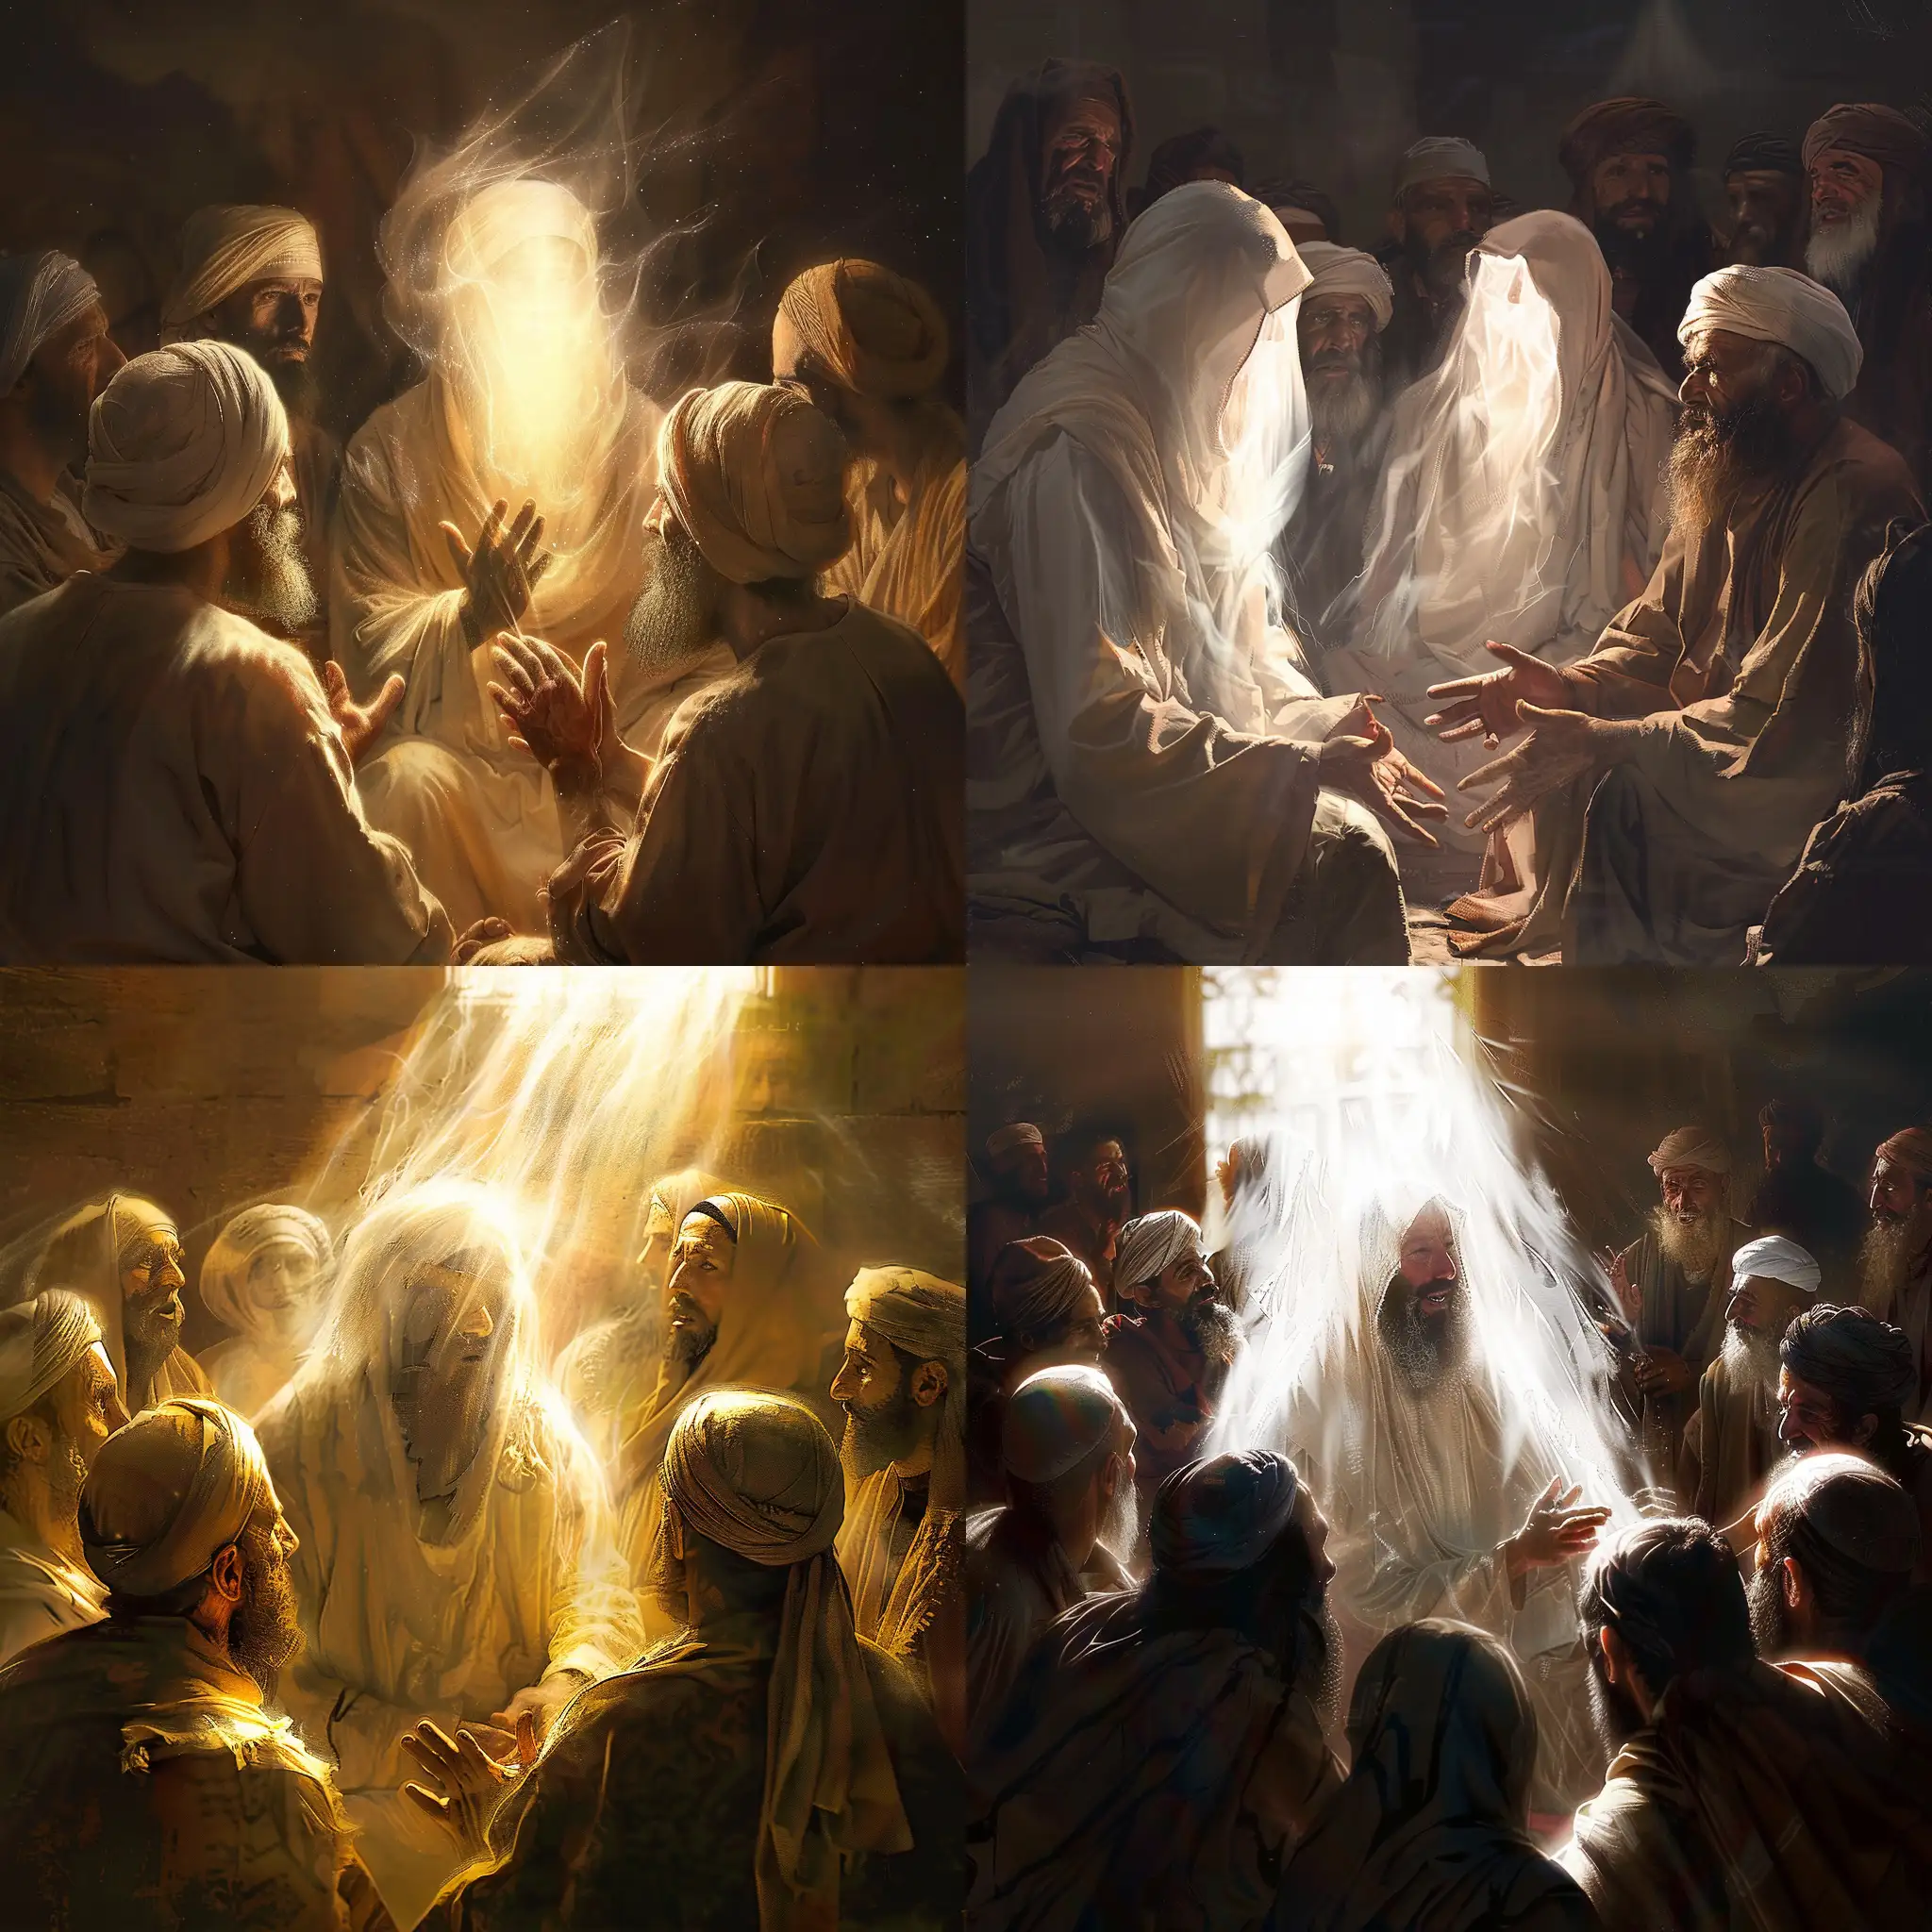 Prophet of God speaking to his companions and his face is covered completely by light, artistic style